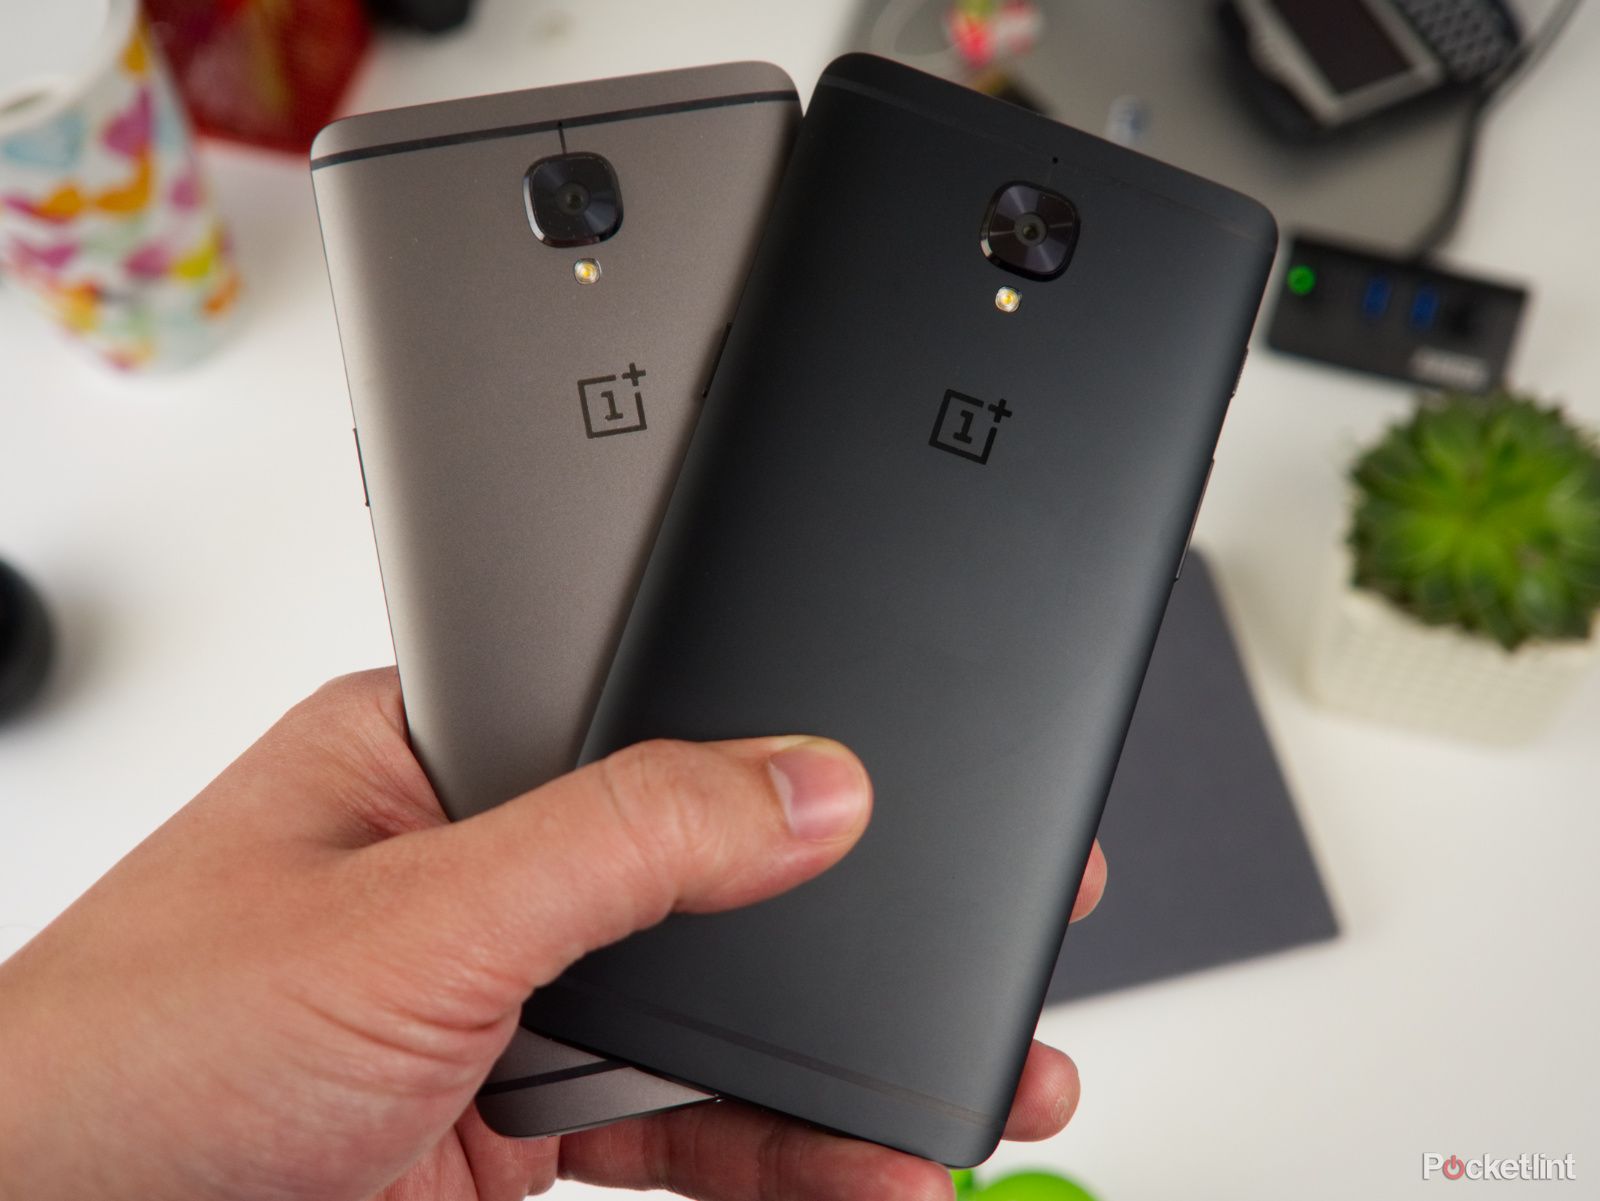 oneplus 5 will launch on 20 june image 1